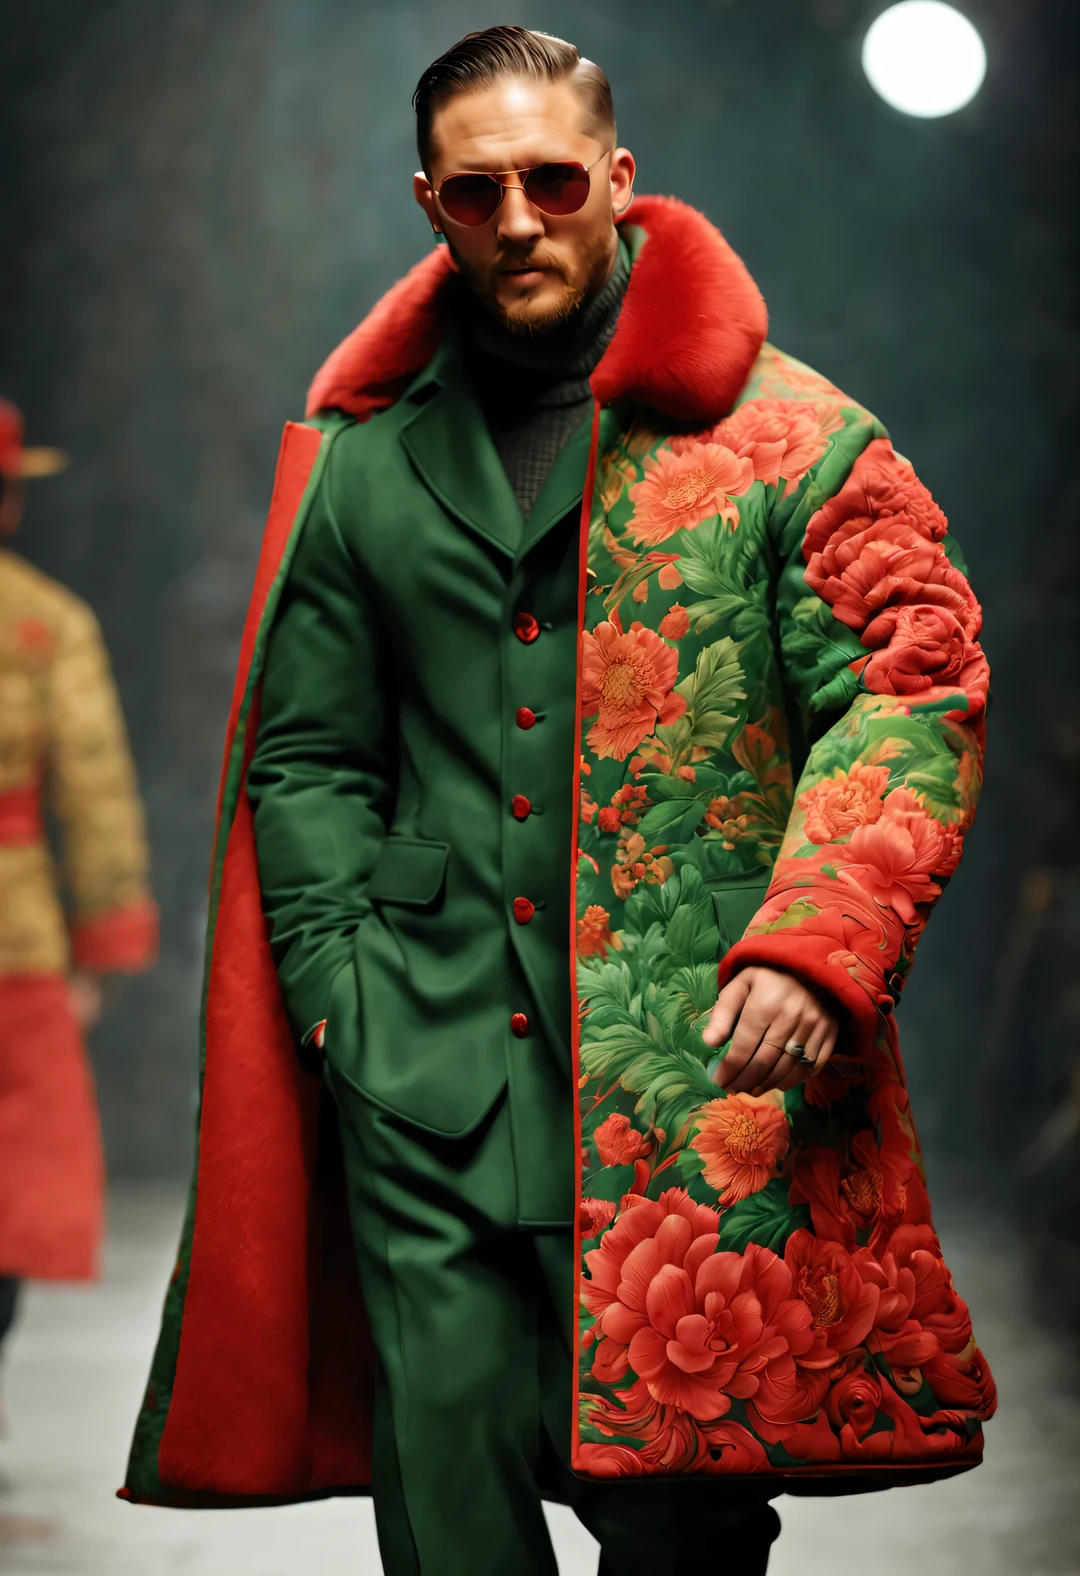 On the fashion show, Tom Hardy, Tall fit male model, (Wearing a thick cotton coat made of red and green peony cloth: 1.34), (Extra long cotton military coat: 0.65), Has warmth、Windproof cotton coat, peony flower, Leaves, Embroidery with Suzhou red and green peony pattern as the theme, (Tan fur coat collar), (tibetan shaman jewelry), complex mixed styles, (Gentlemanly manners), Embroidered Su Embroidery Big Red Parka Snow Coat, woolen hat, (exceed) coat jacket, big duckbill hat, (Black Sweater, winter scarf warm scarf), gloves gloves, belt, Cotton boots, sunglasses, Combat boots, sports shoes, big photography,
background: Fashion photos of street scenes in snowy weather, depth of field, Ultra-clear, super high quality, Bottom-to-top perspective,